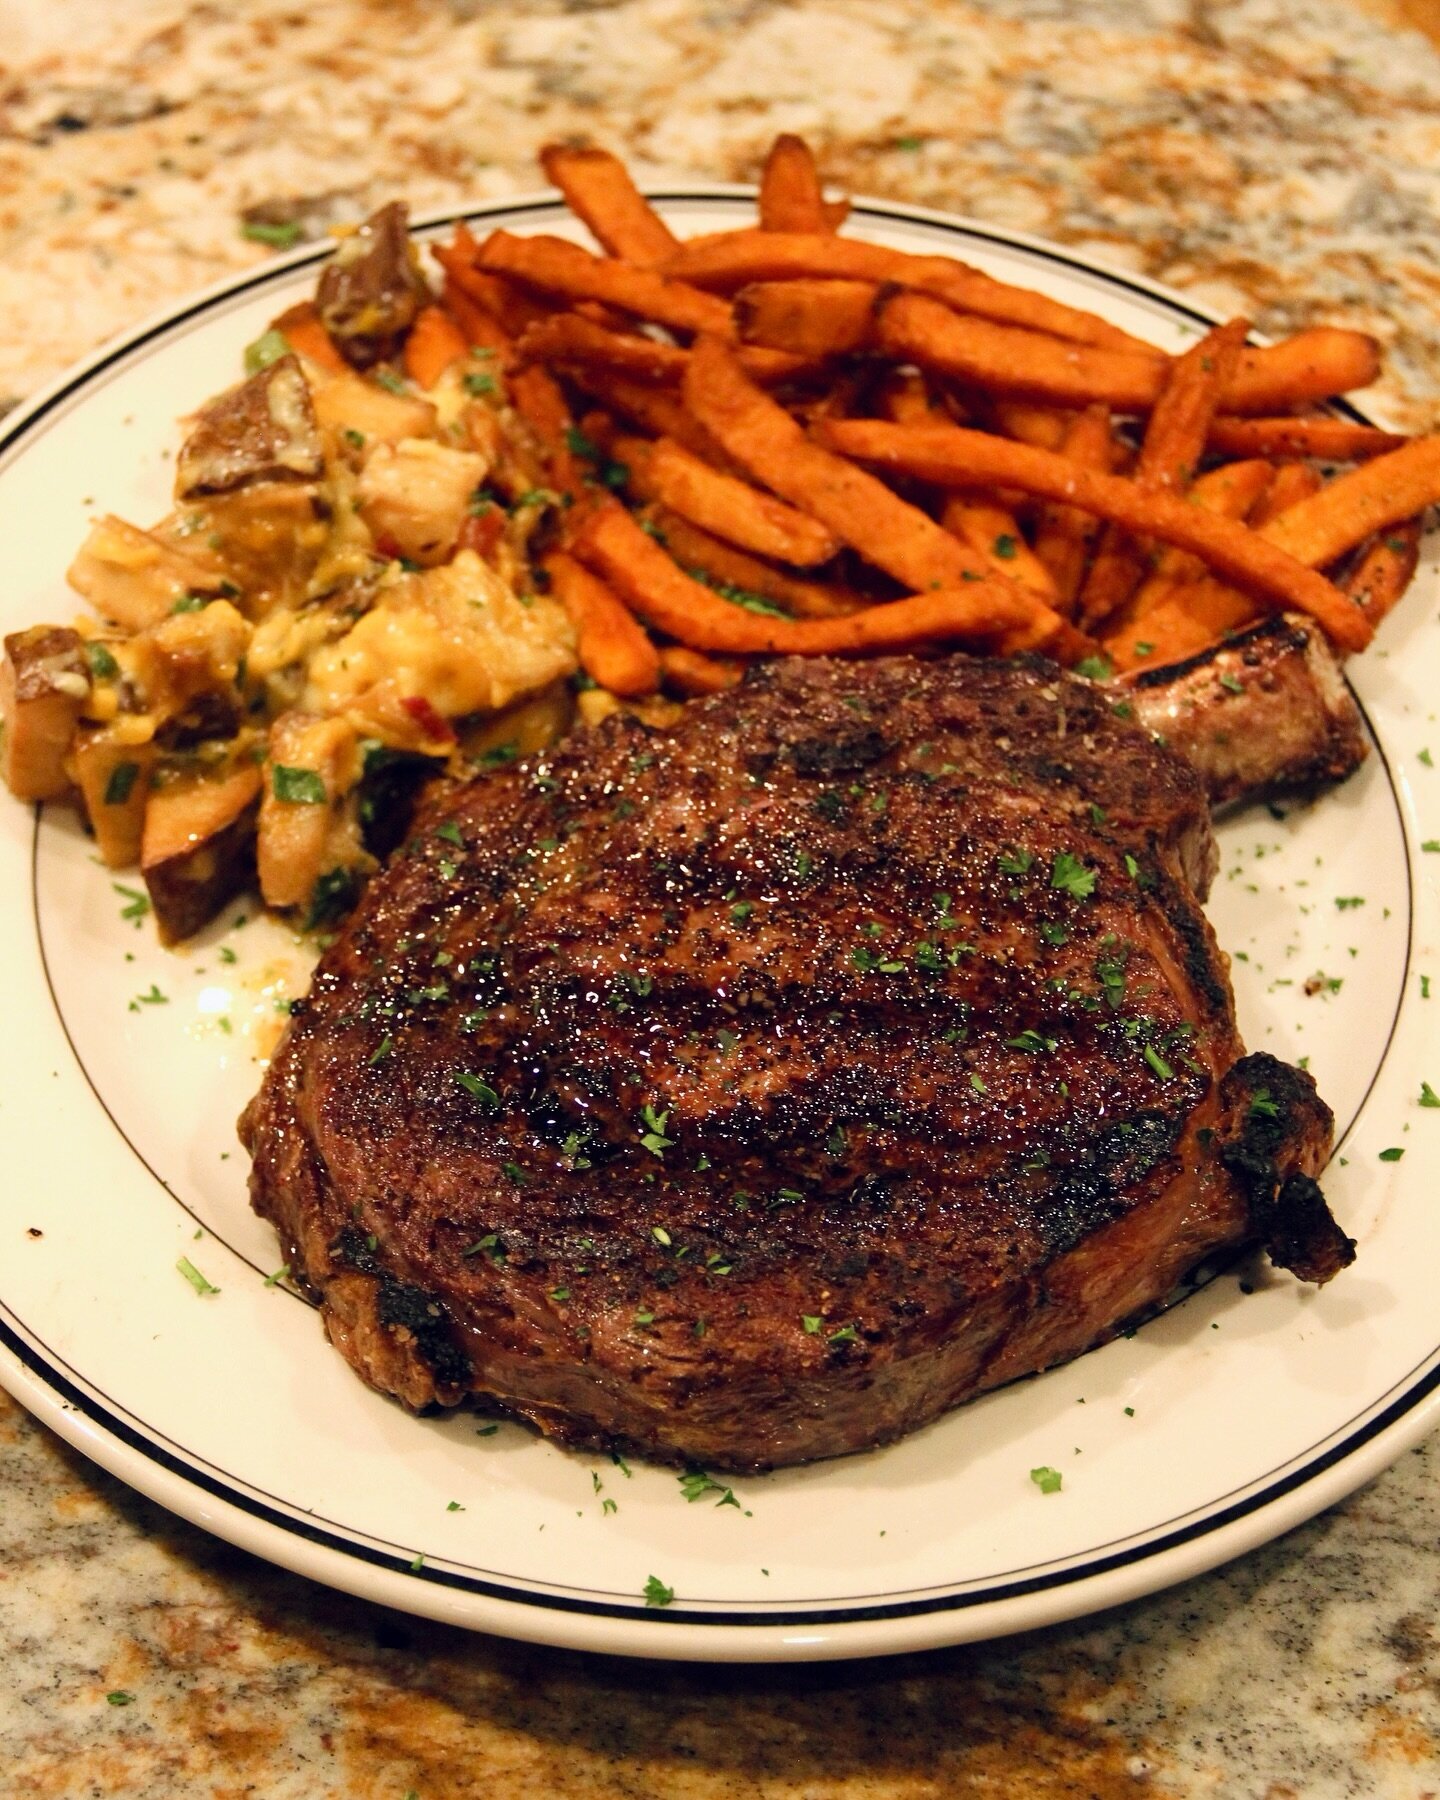 If the phrase &ldquo;meat and potatoes&rdquo; doesn&rsquo;t get you excited&hellip; you haven&rsquo;t met our potatoes 🤣
(Or our 22oz bone-in ribeye 🤤)